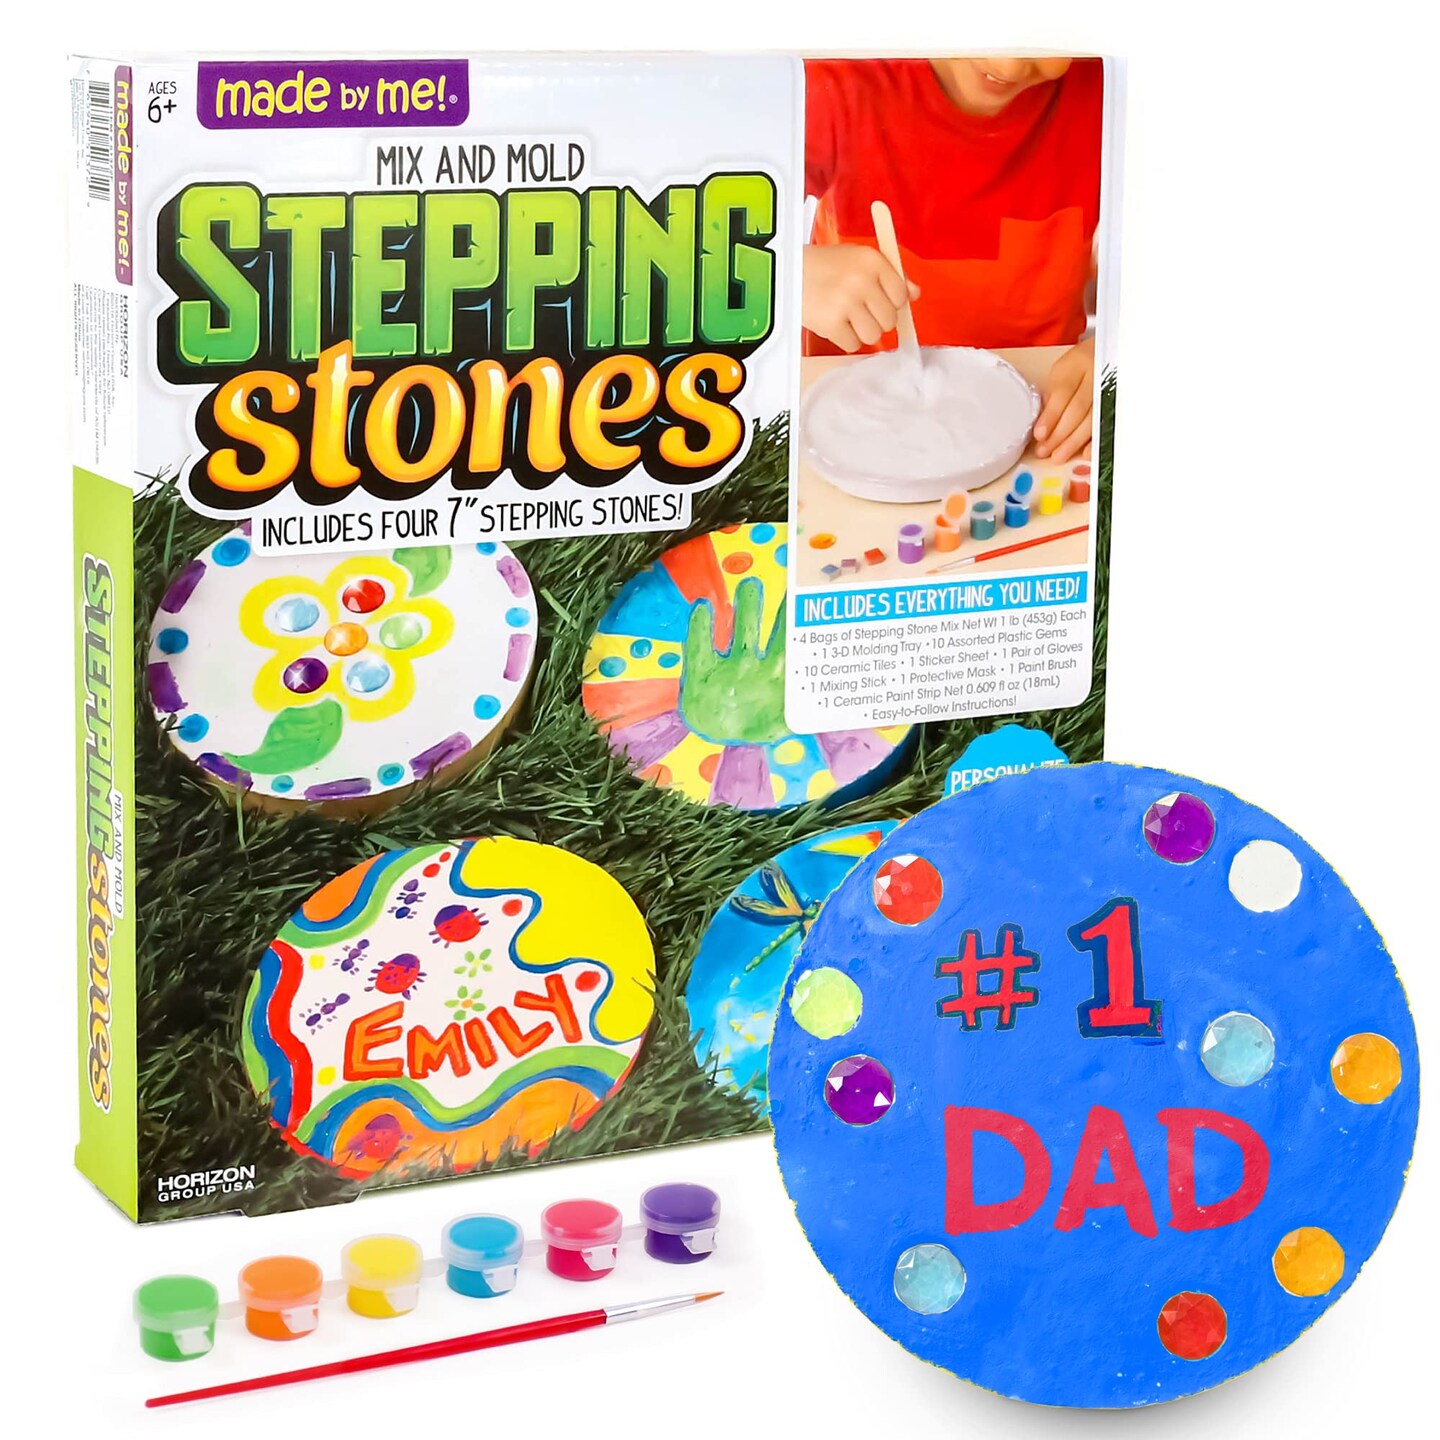 Made By Me Mix &#x26; Mold Stepping Stones, Make 4 DIY Personalized 7-Inch Ceramic Stepping Stones, Includes 3D Mold, Ceramic Paints, Ceramic Tiles, &#x26; Assorted Gems, Paint Your Own Stepping Stones